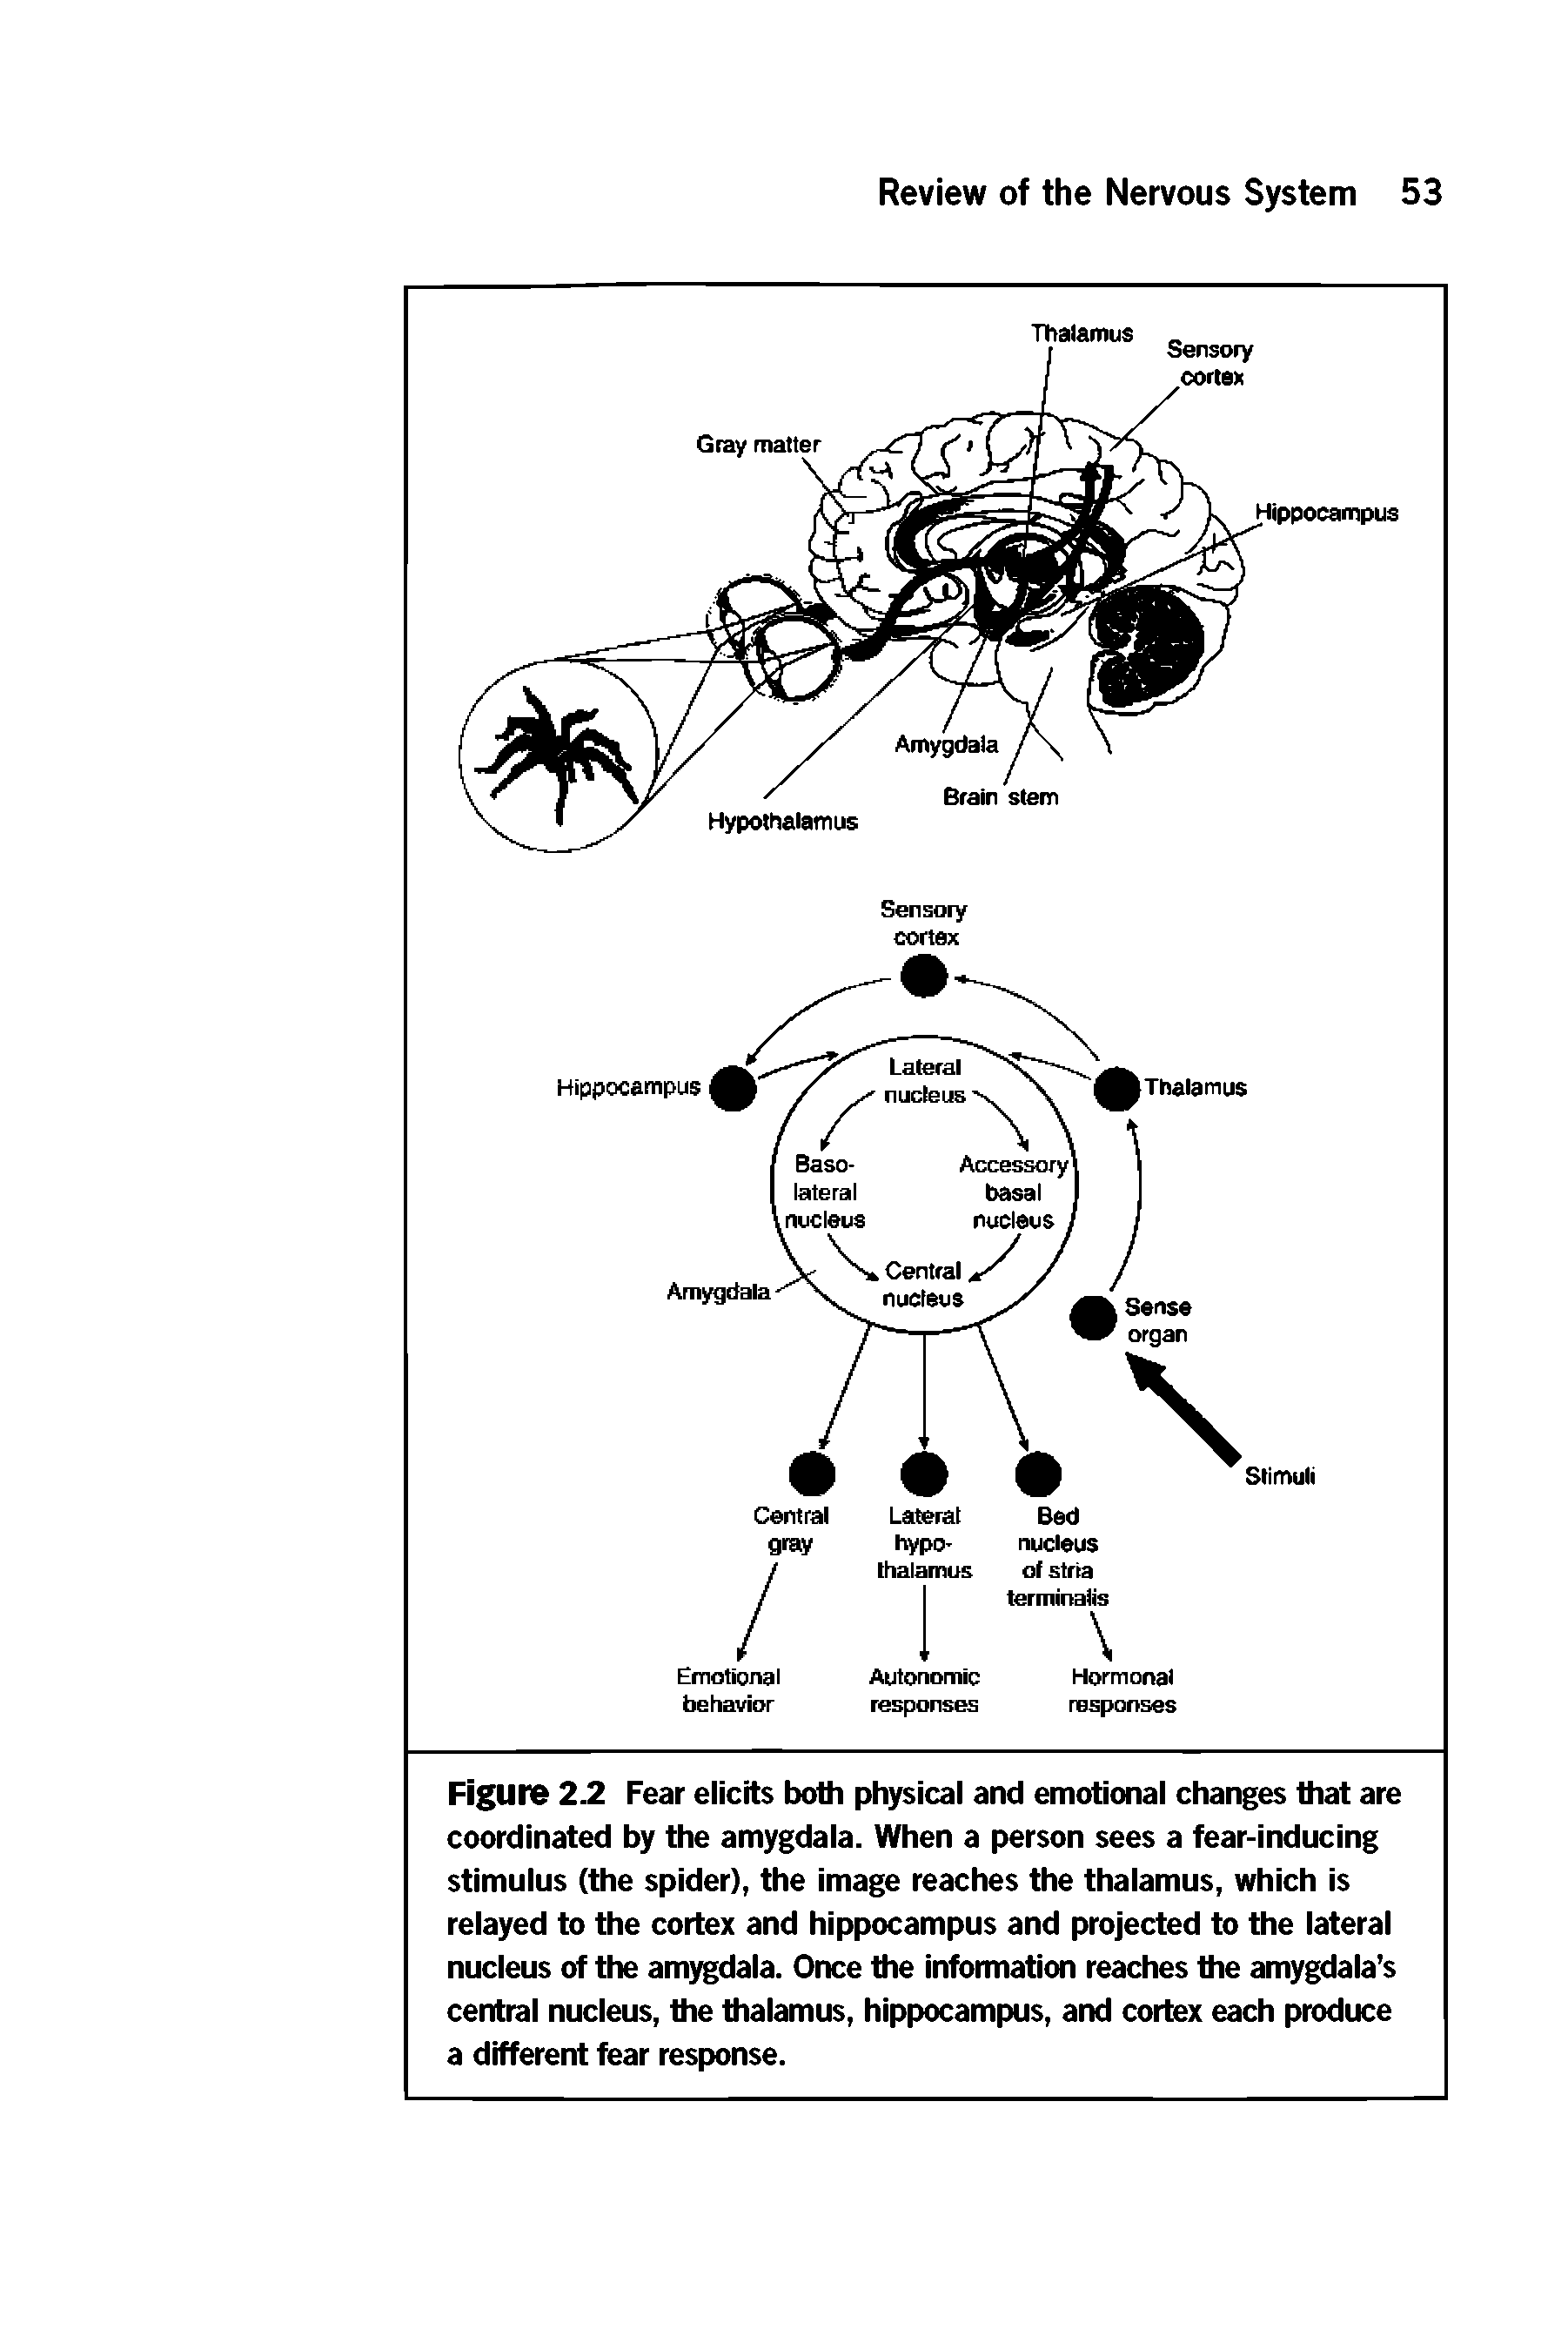 Figure 2.2 Fear elicits both physical and emotional changes that are coordinated by the amygdala. When a person sees a fear-inducing stimulus (the spider), the image reaches the thalamus, which is relayed to the cortex and hippocampus and projected to the lateral nucleus of the am dala. Once the information reaches the amygdala s central nucleus, the thalamus, hippocampus, and cortex each produce a different fear response.